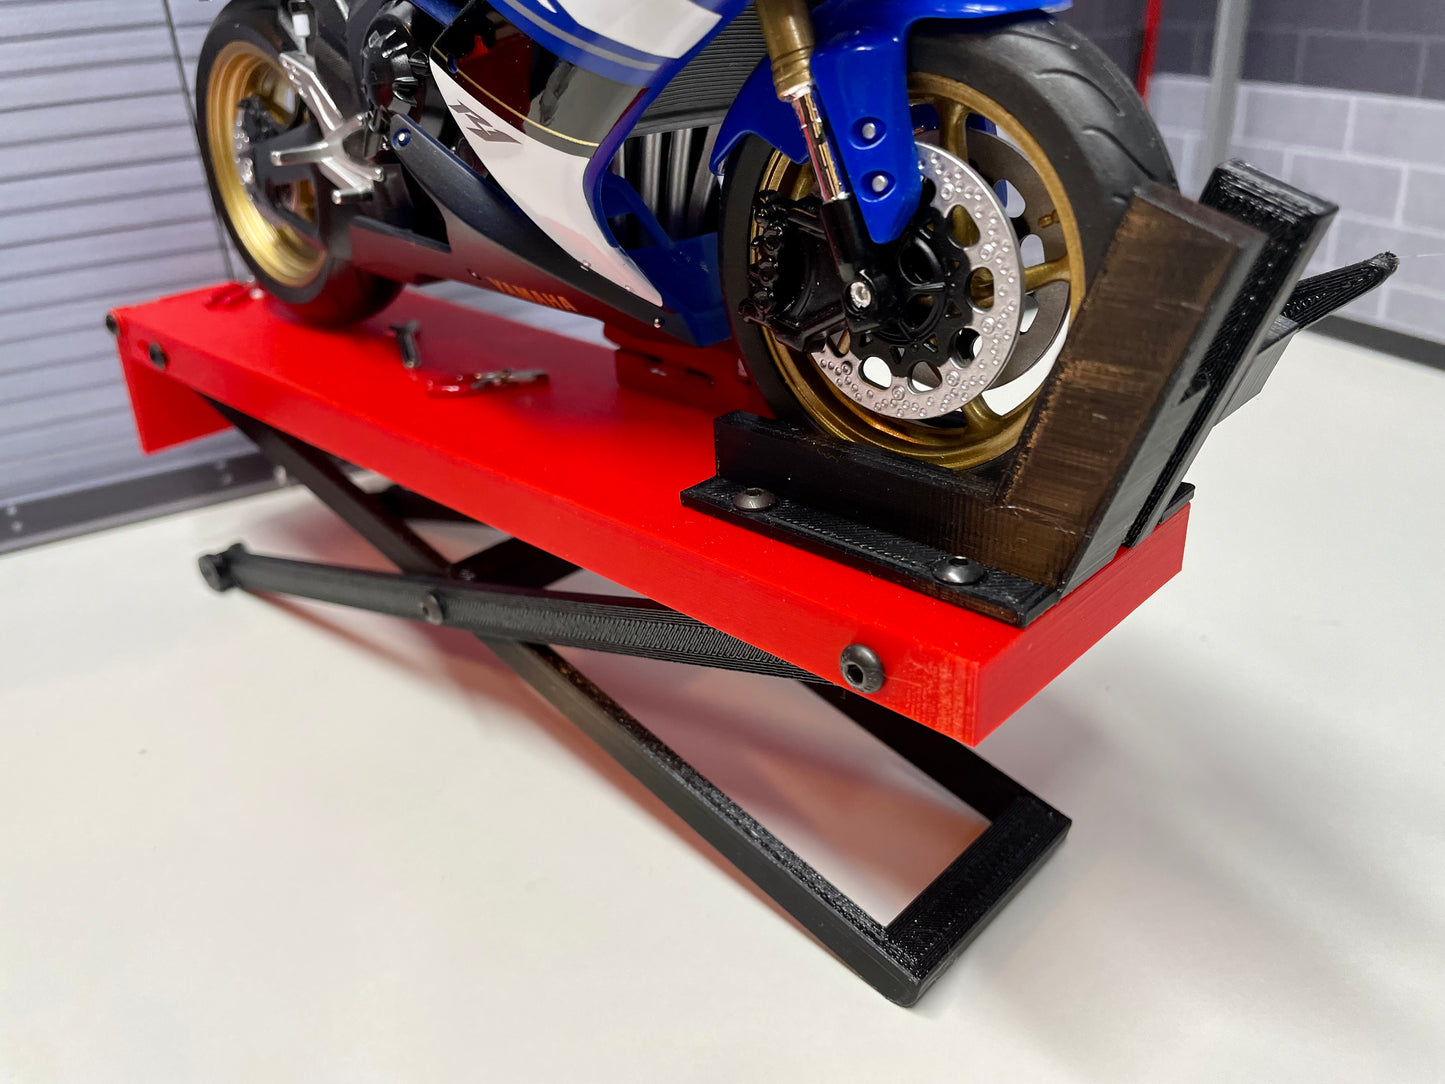 1/10 Scale Motorcycle Work Stand